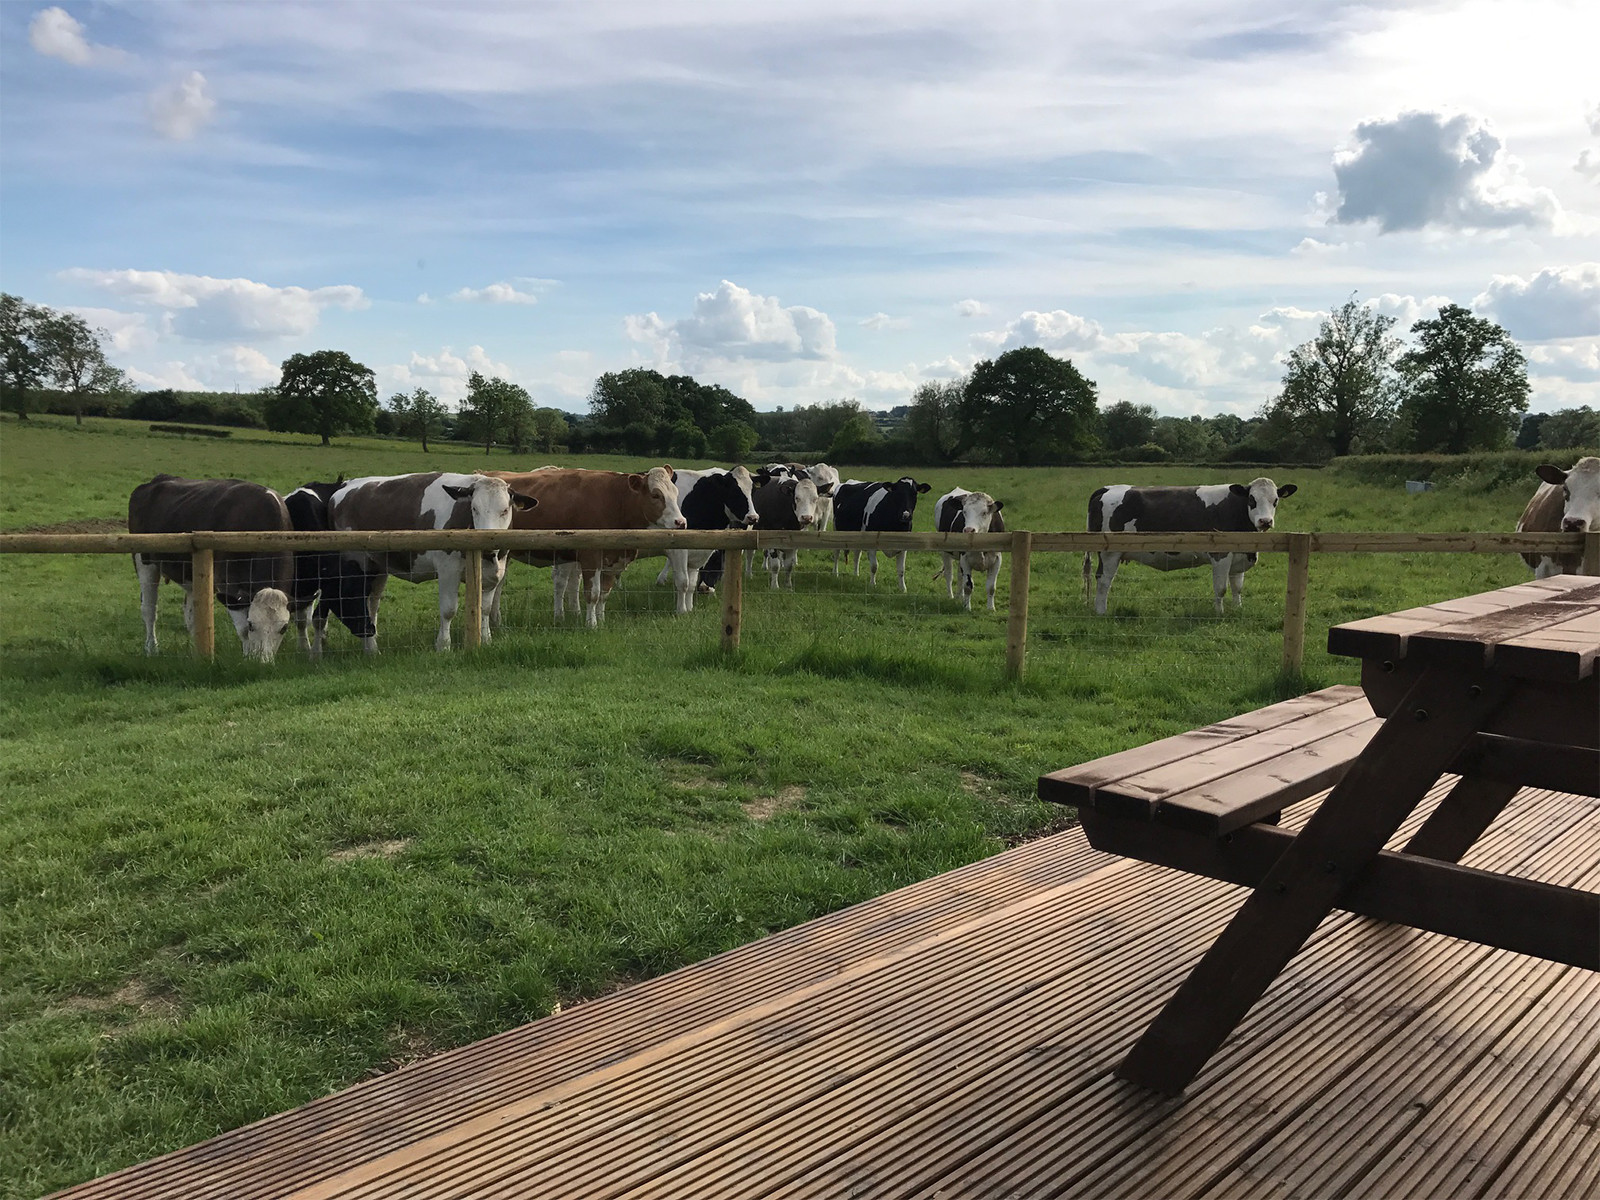 Our resident herd at Evenlode Grounds Farm